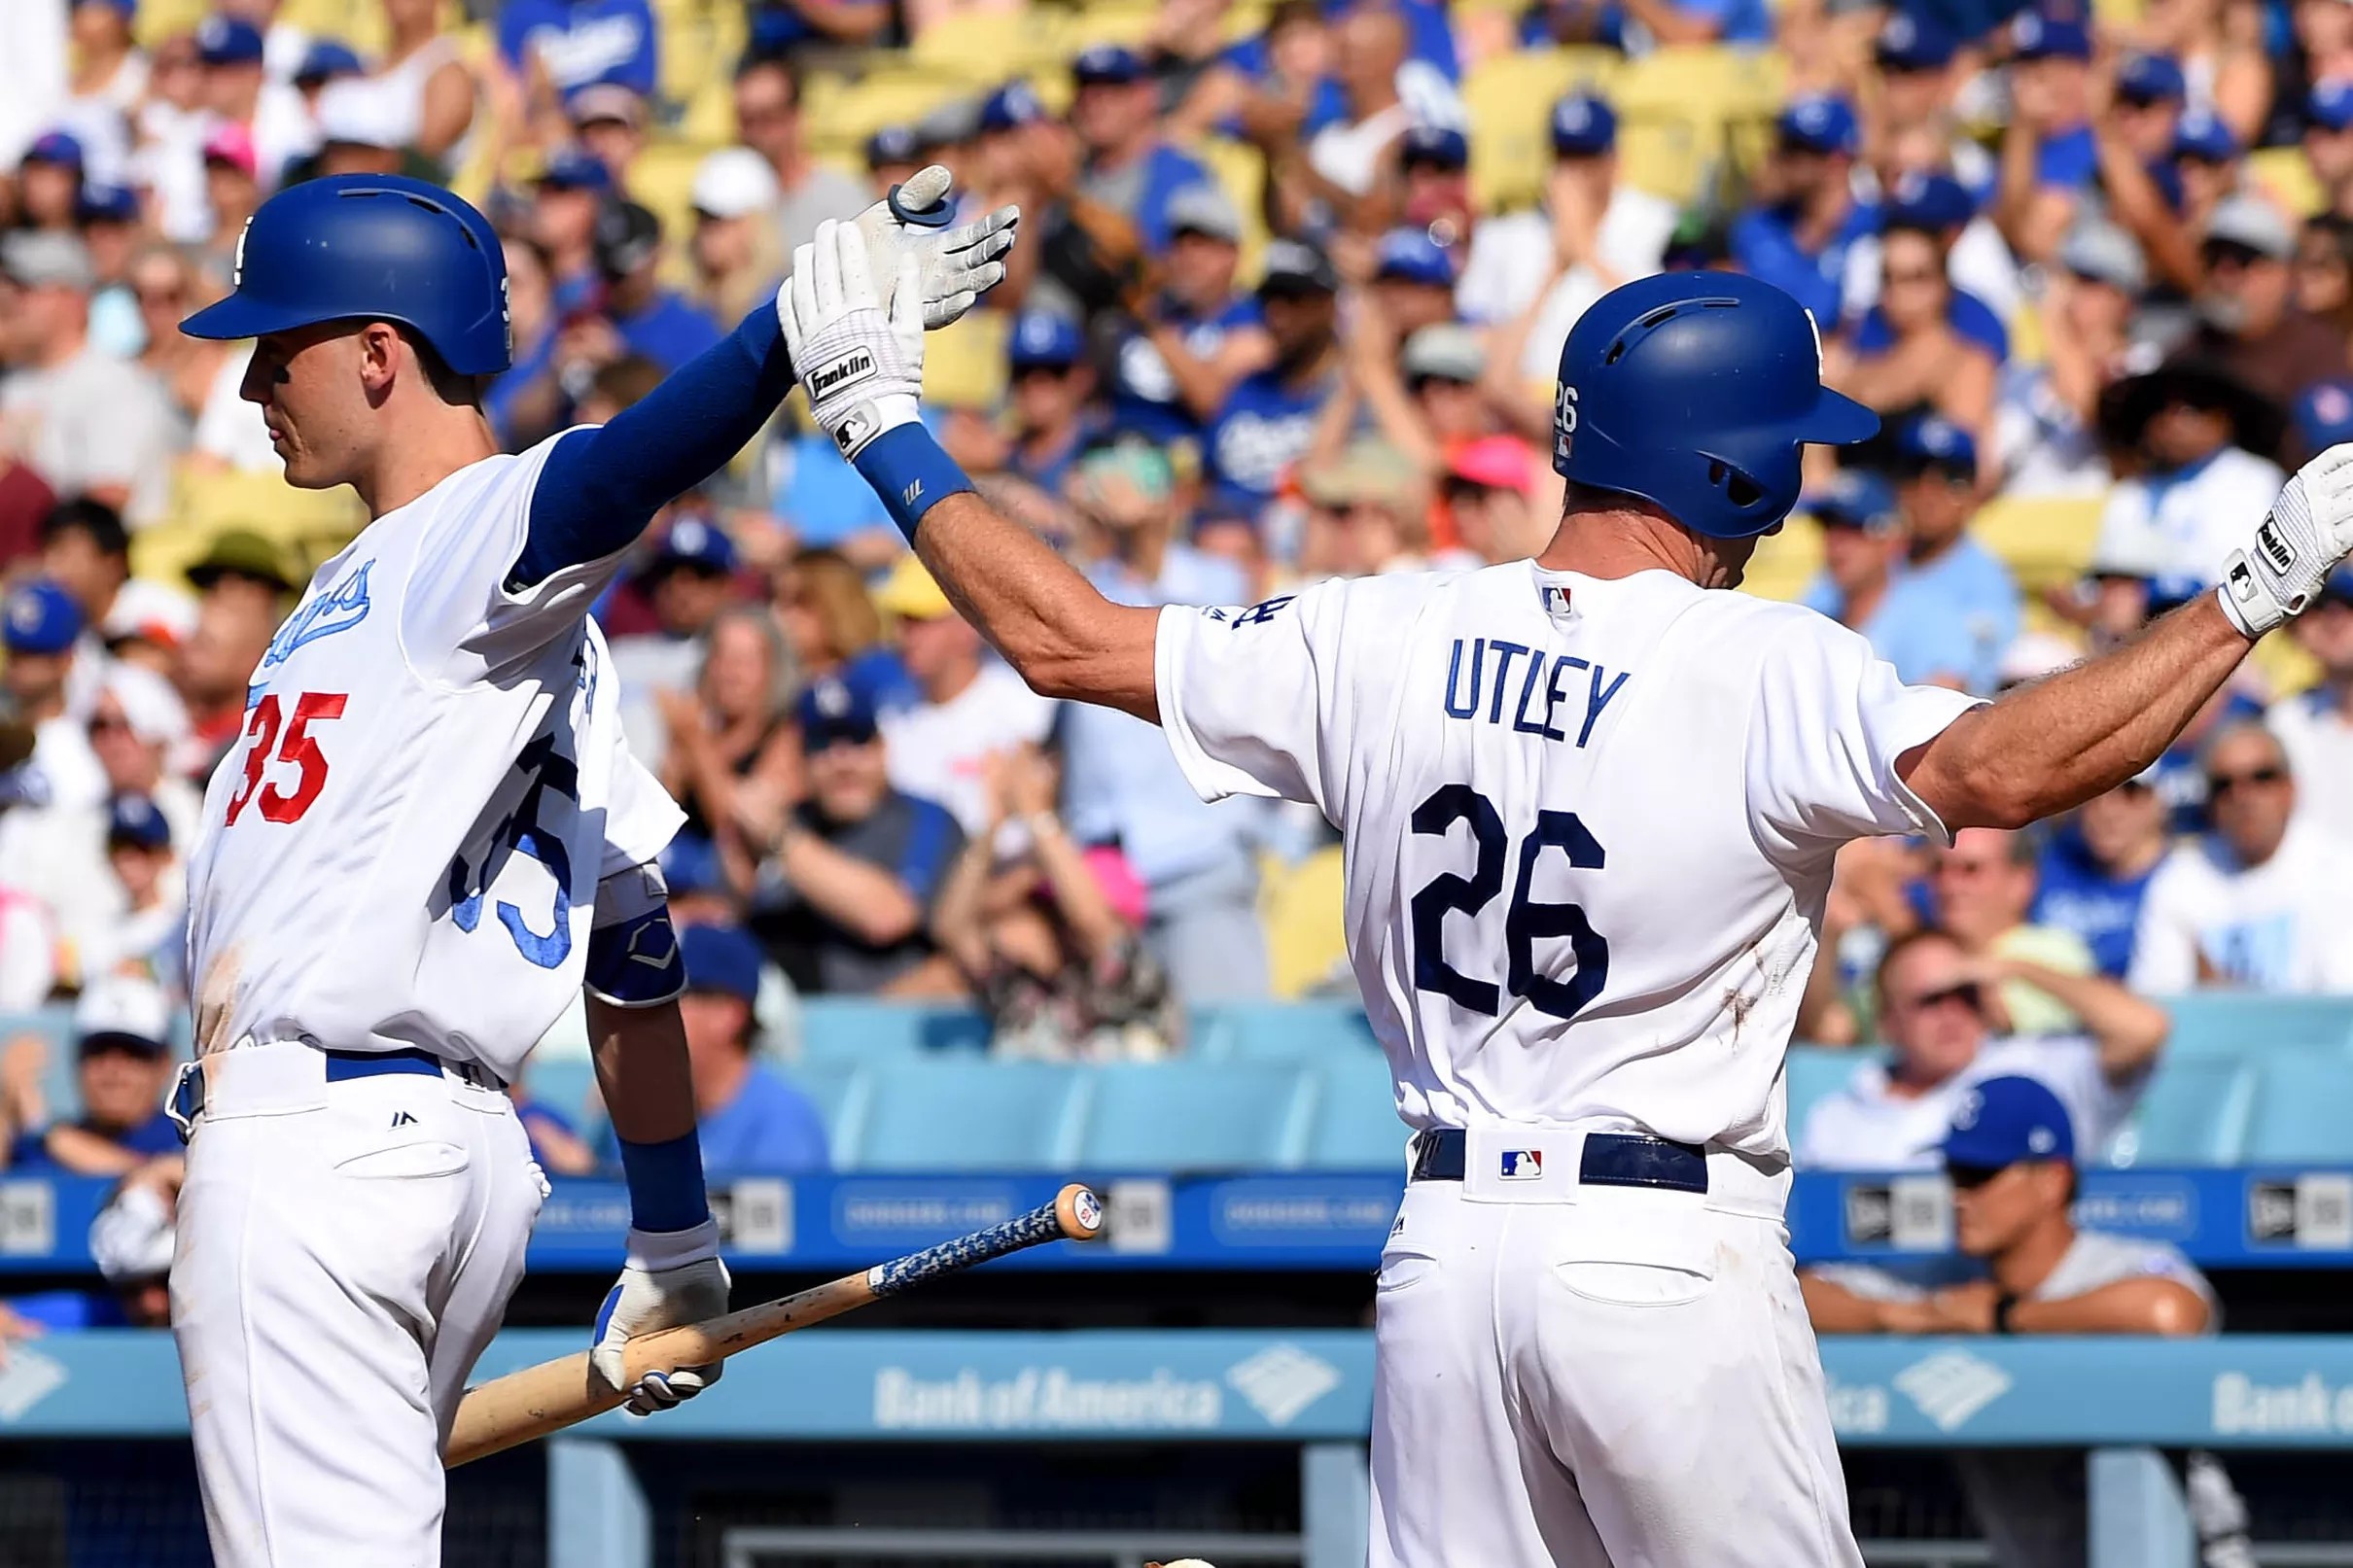 Dodgers win over Royals is a walk in the park